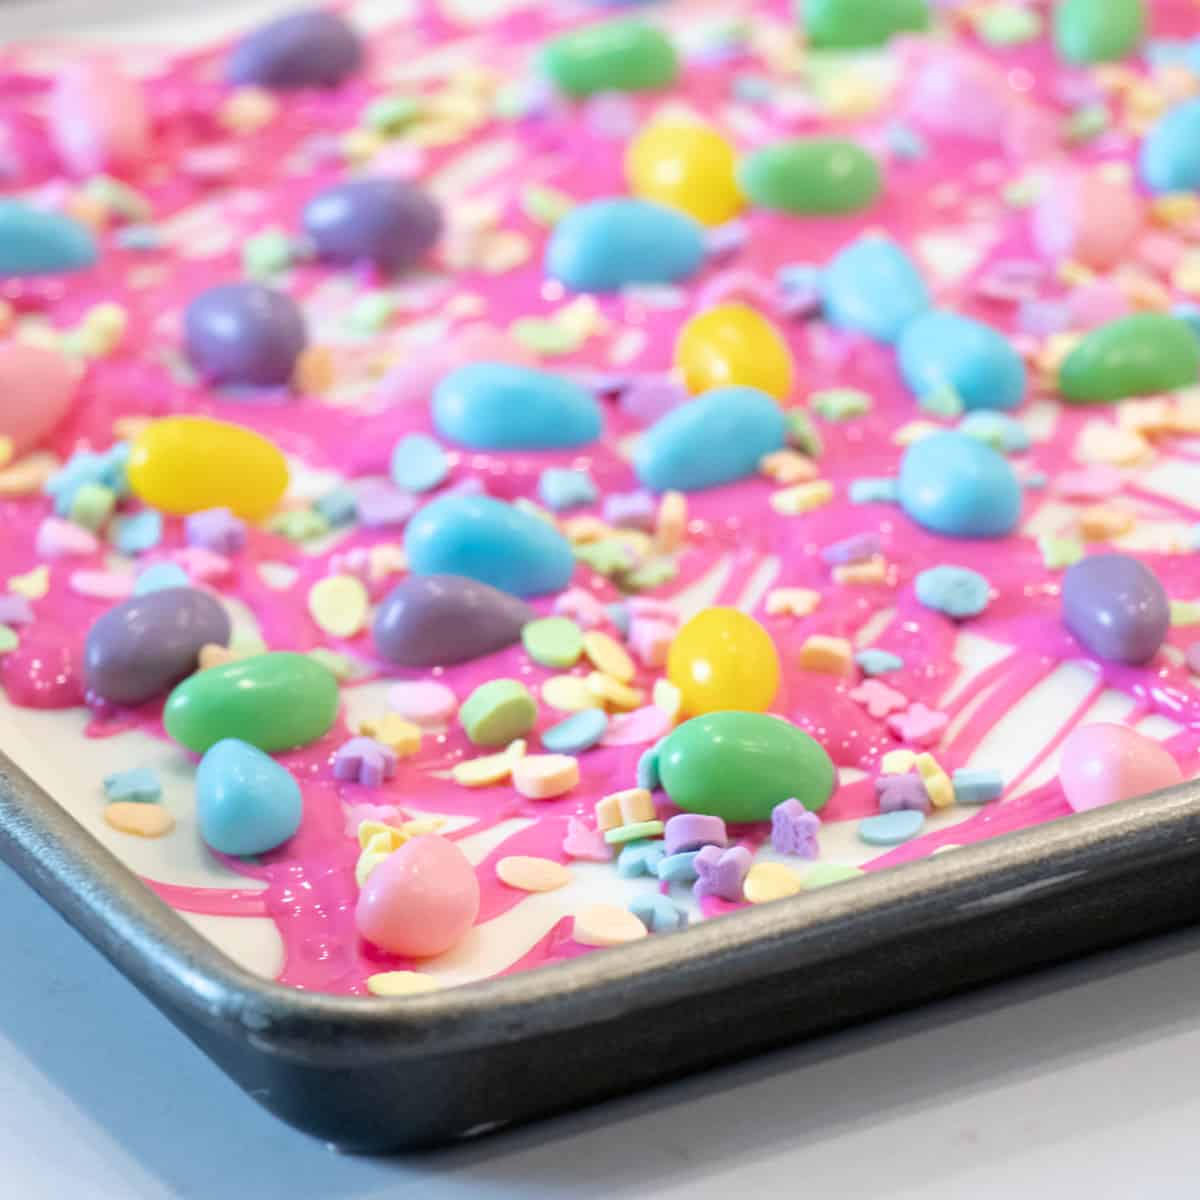 Spring coloured jelly beans on melted chocolate.